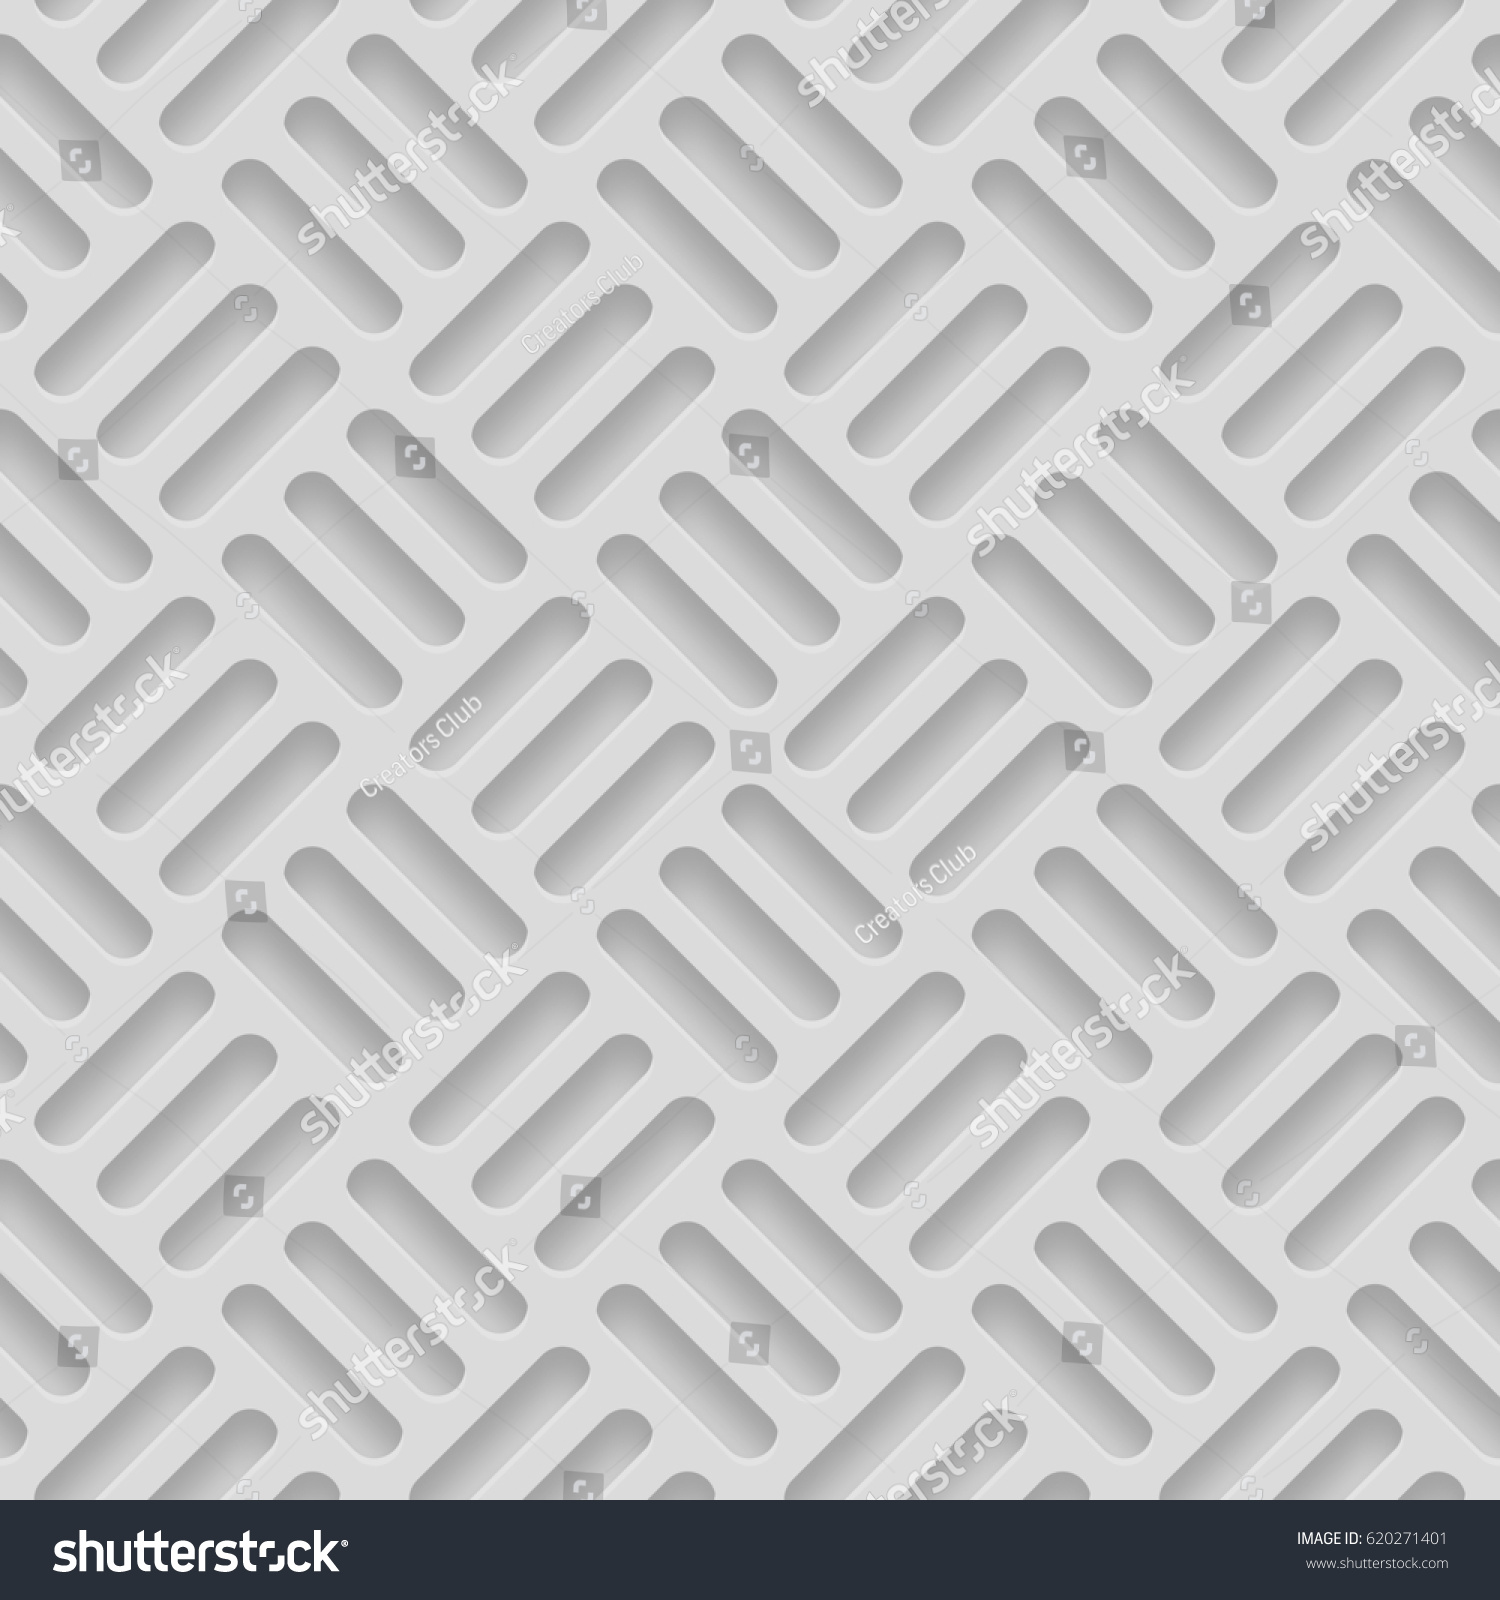 Seamless Patterns Beveled Shapes Abstract Grayscale Stock ...